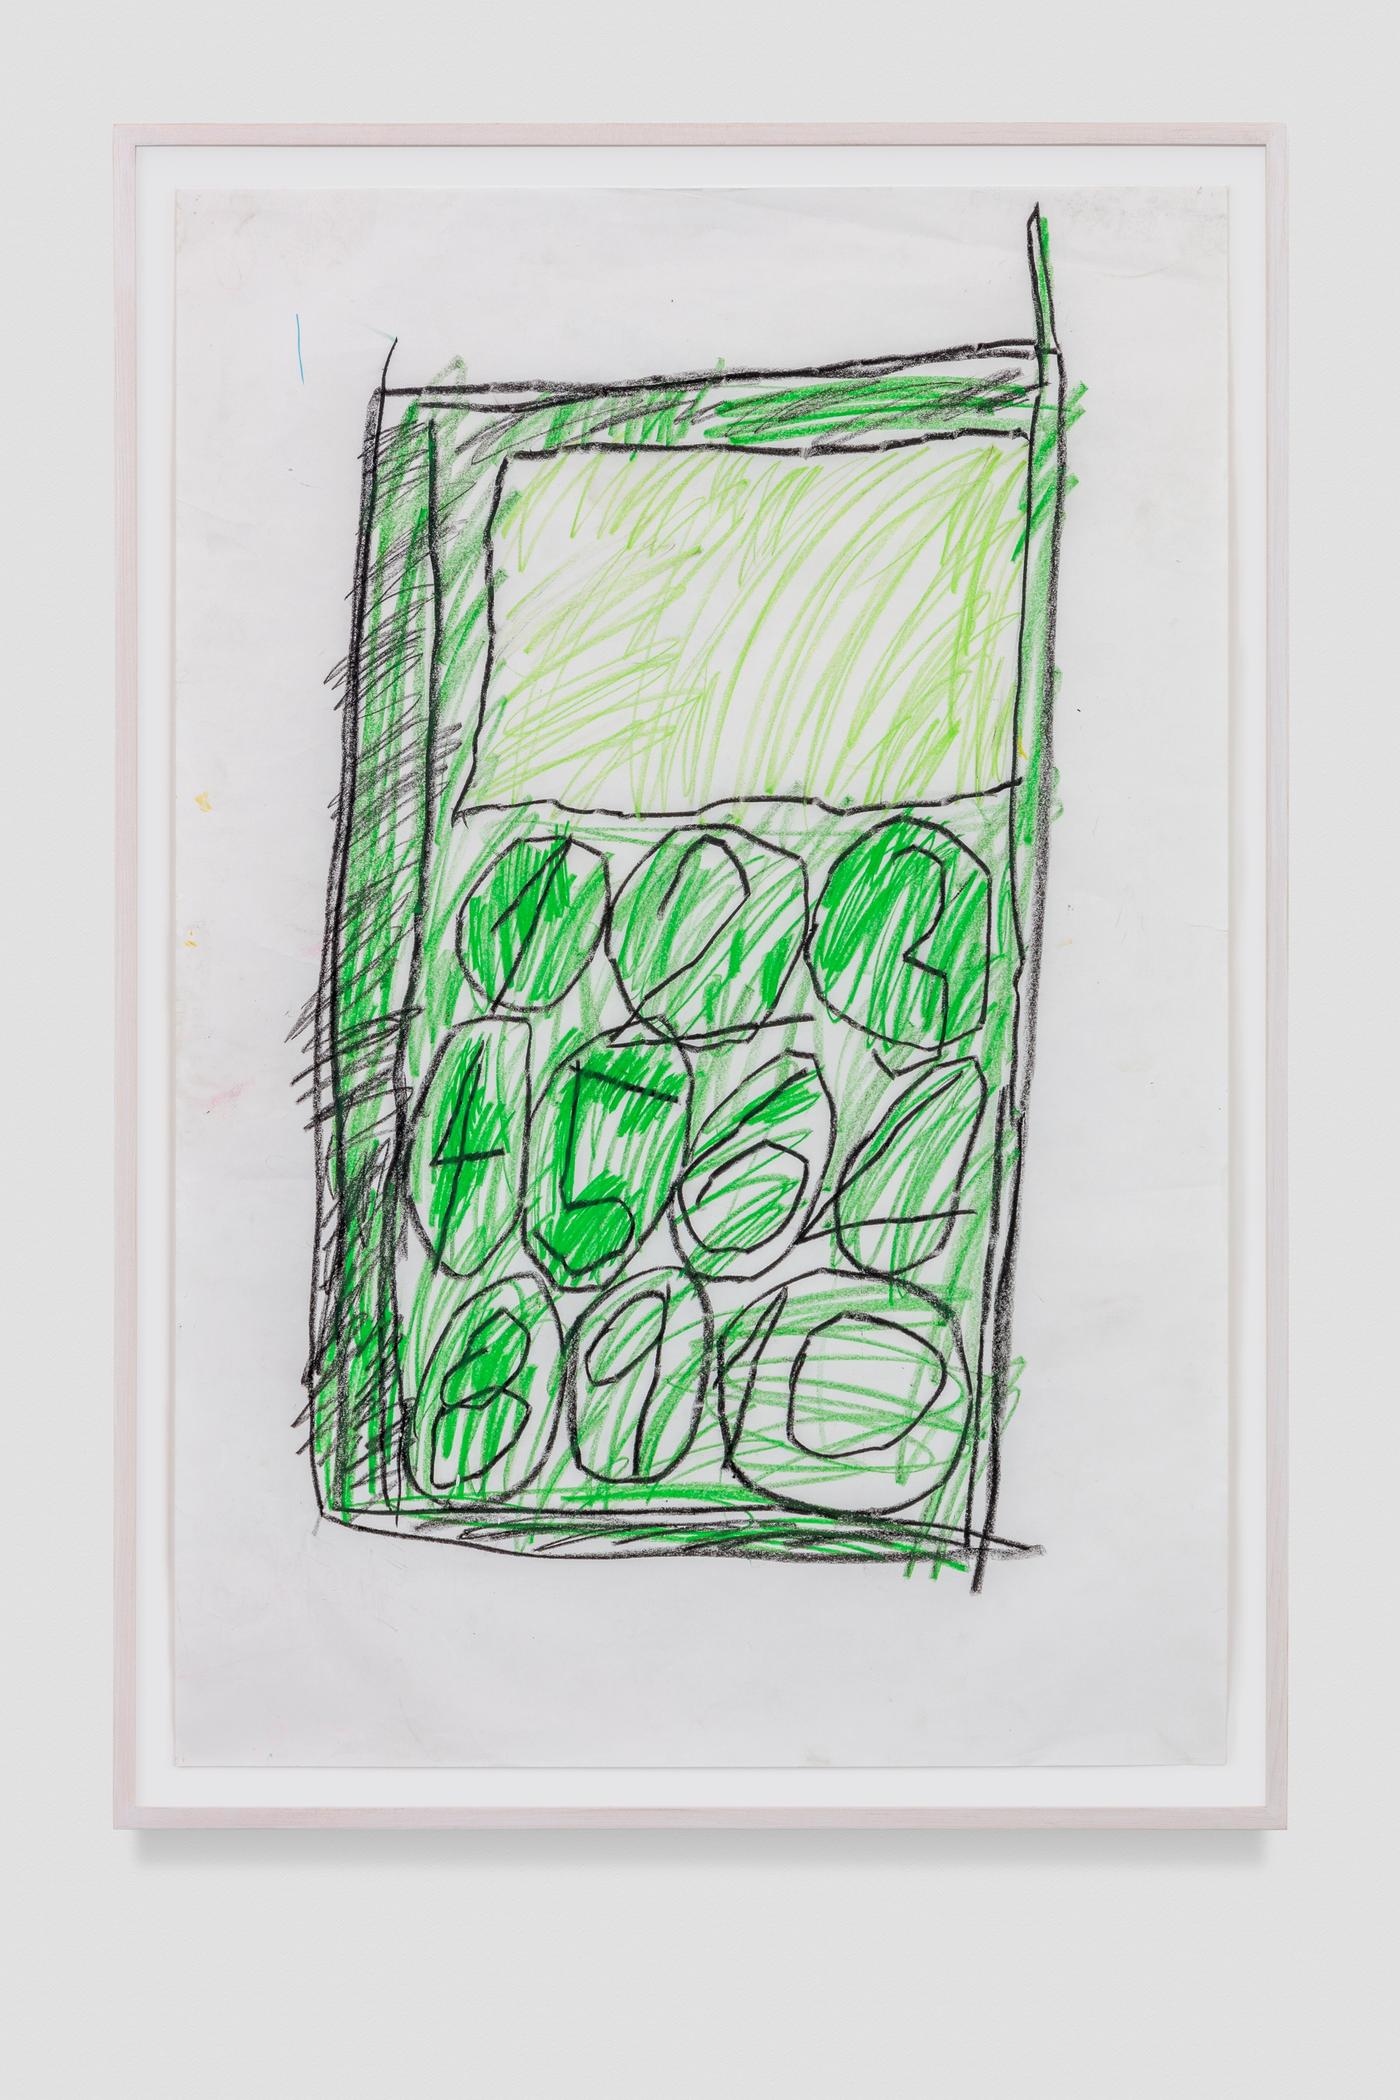 Image of Green phone, 2021: Oil pastel on paper